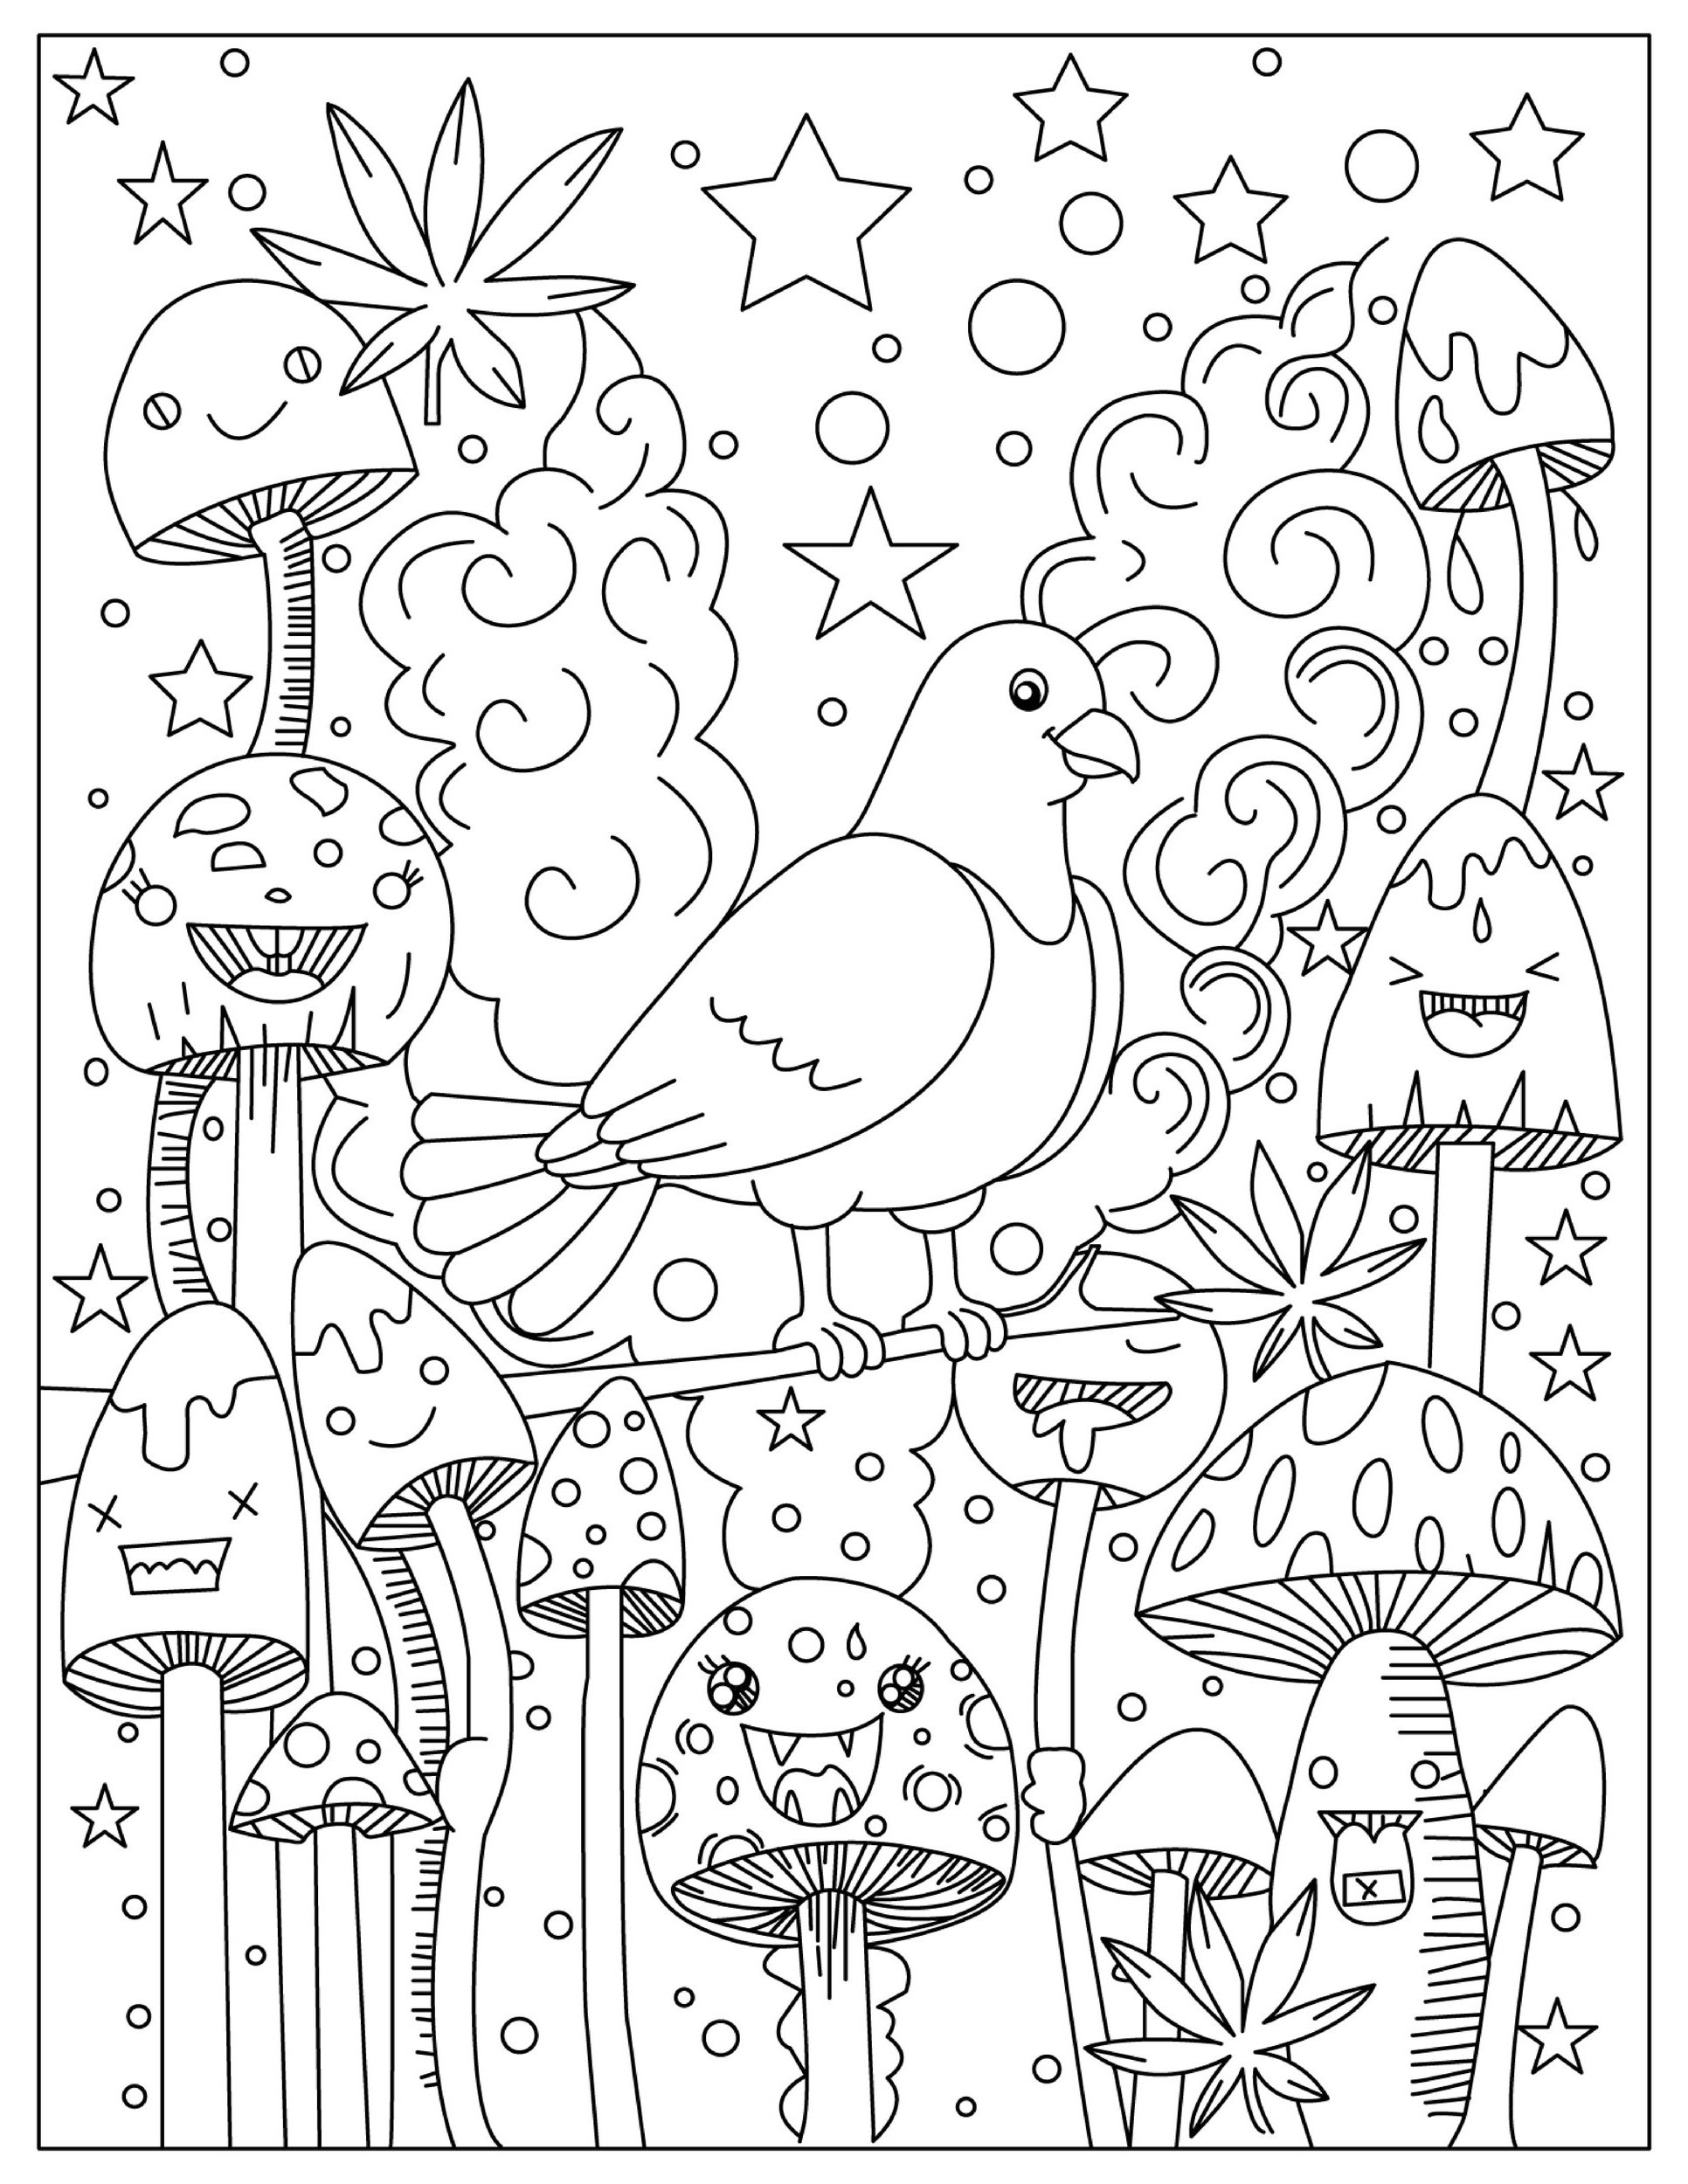 Coloring pages â free weed books